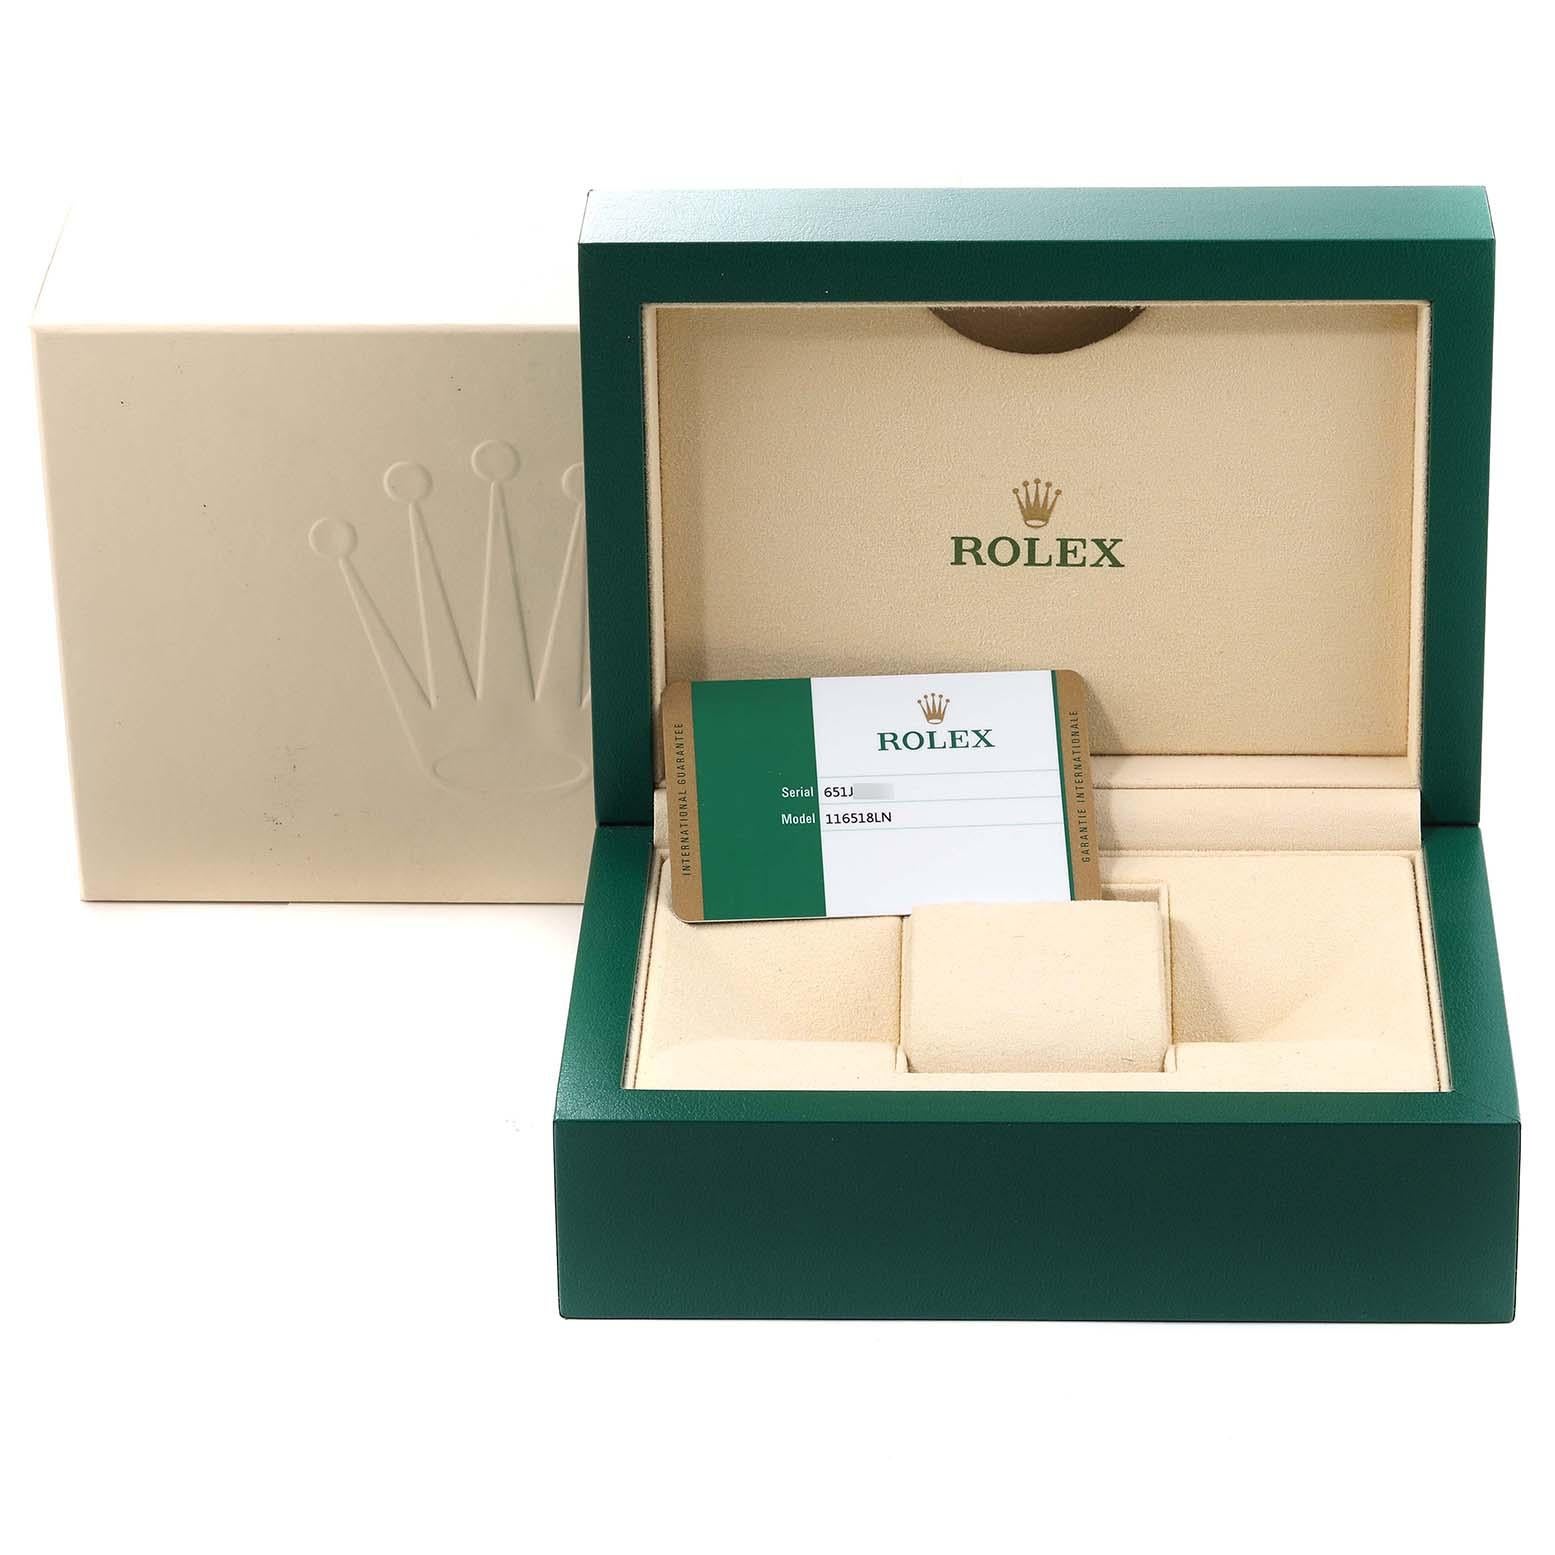 Rolex Daytona Yellow Gold Champagne Dial Mens Watch 116518 Box Card For Sale 7